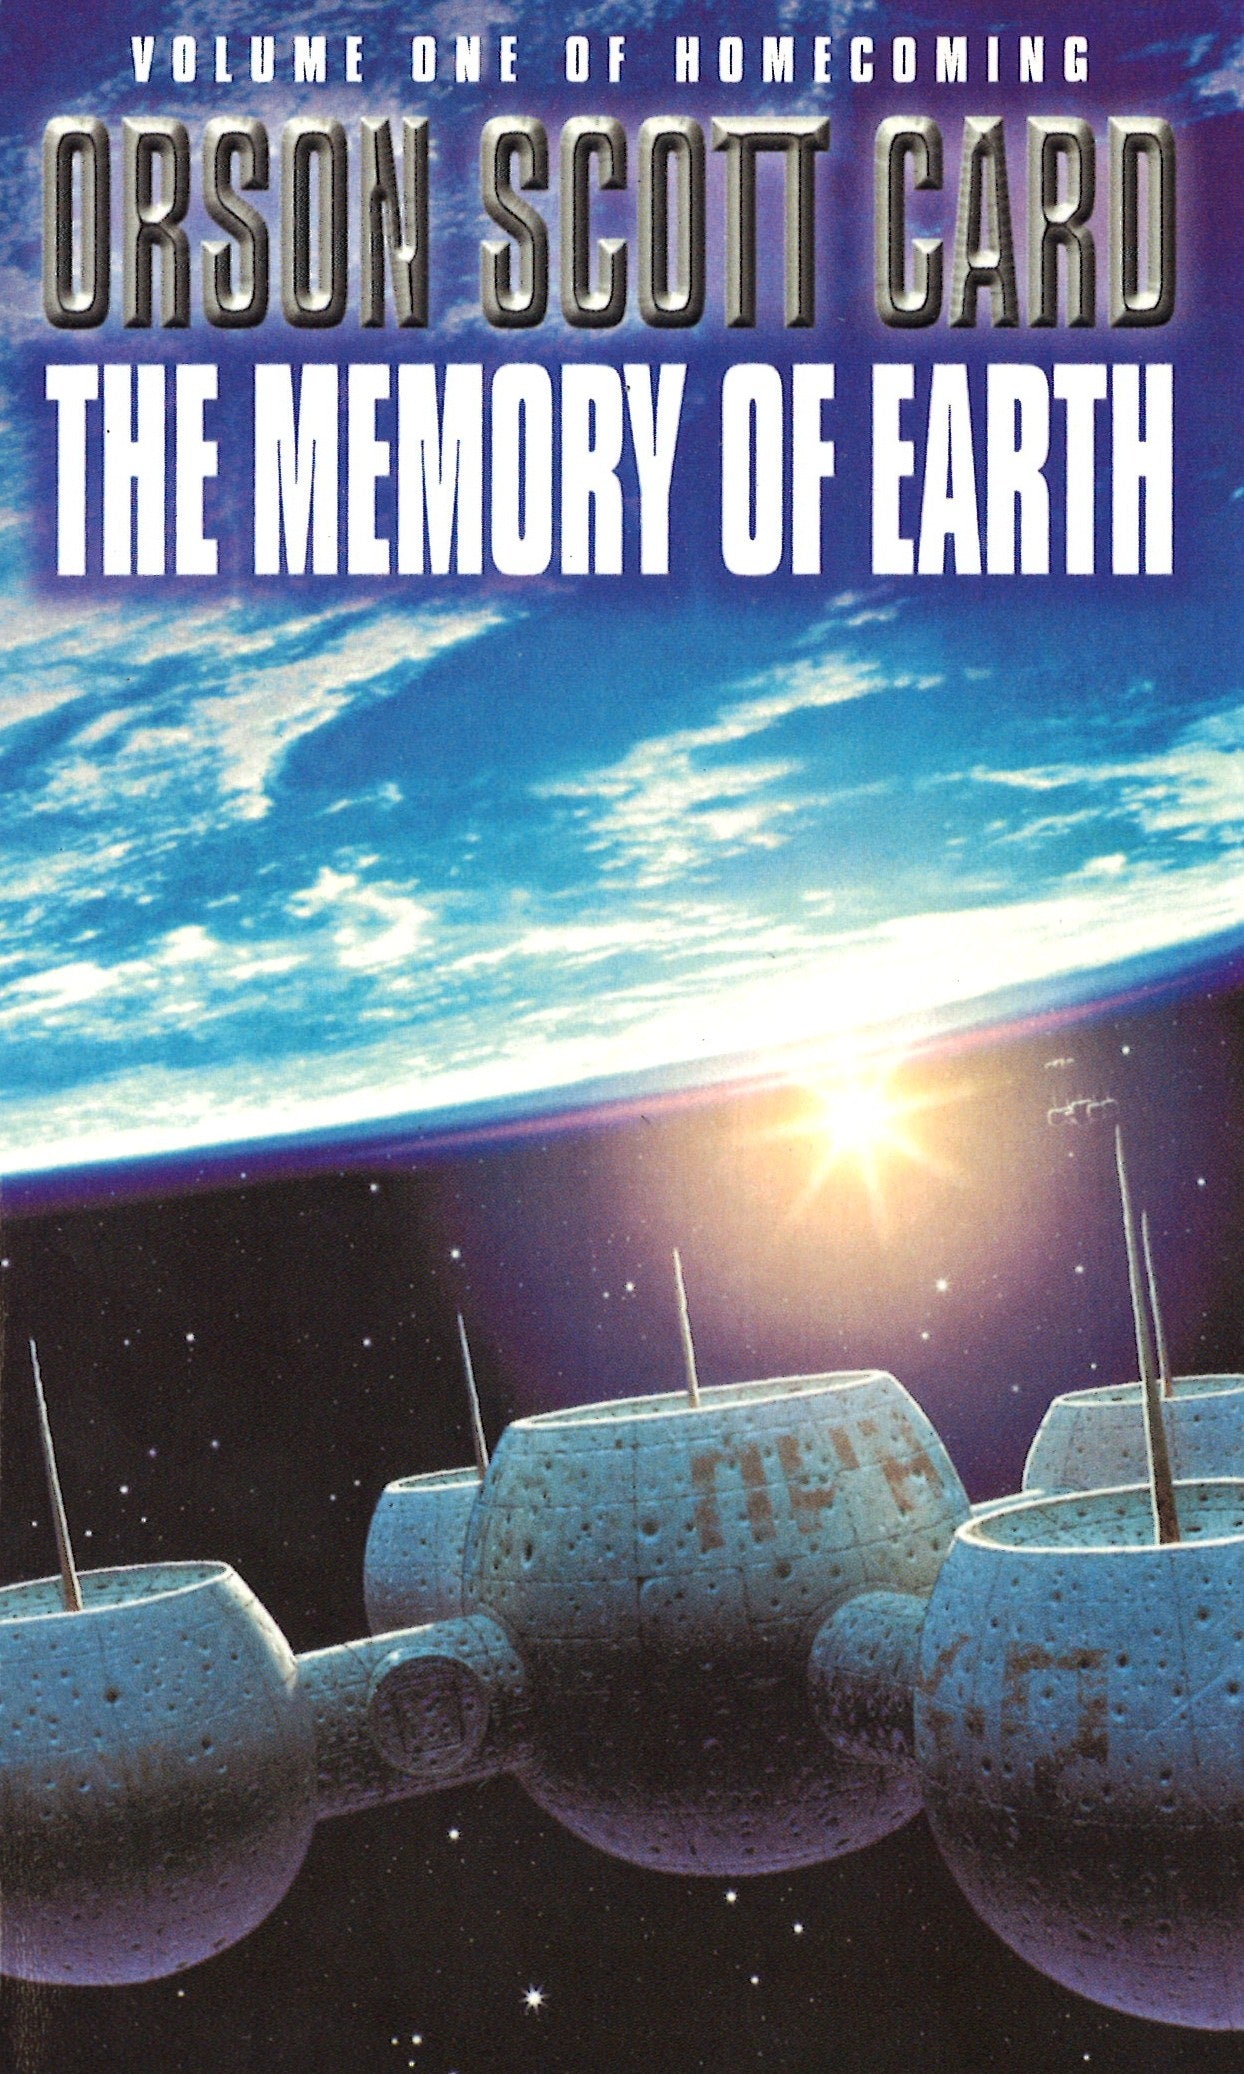 The Memory Of Earth by Orson Scott Card